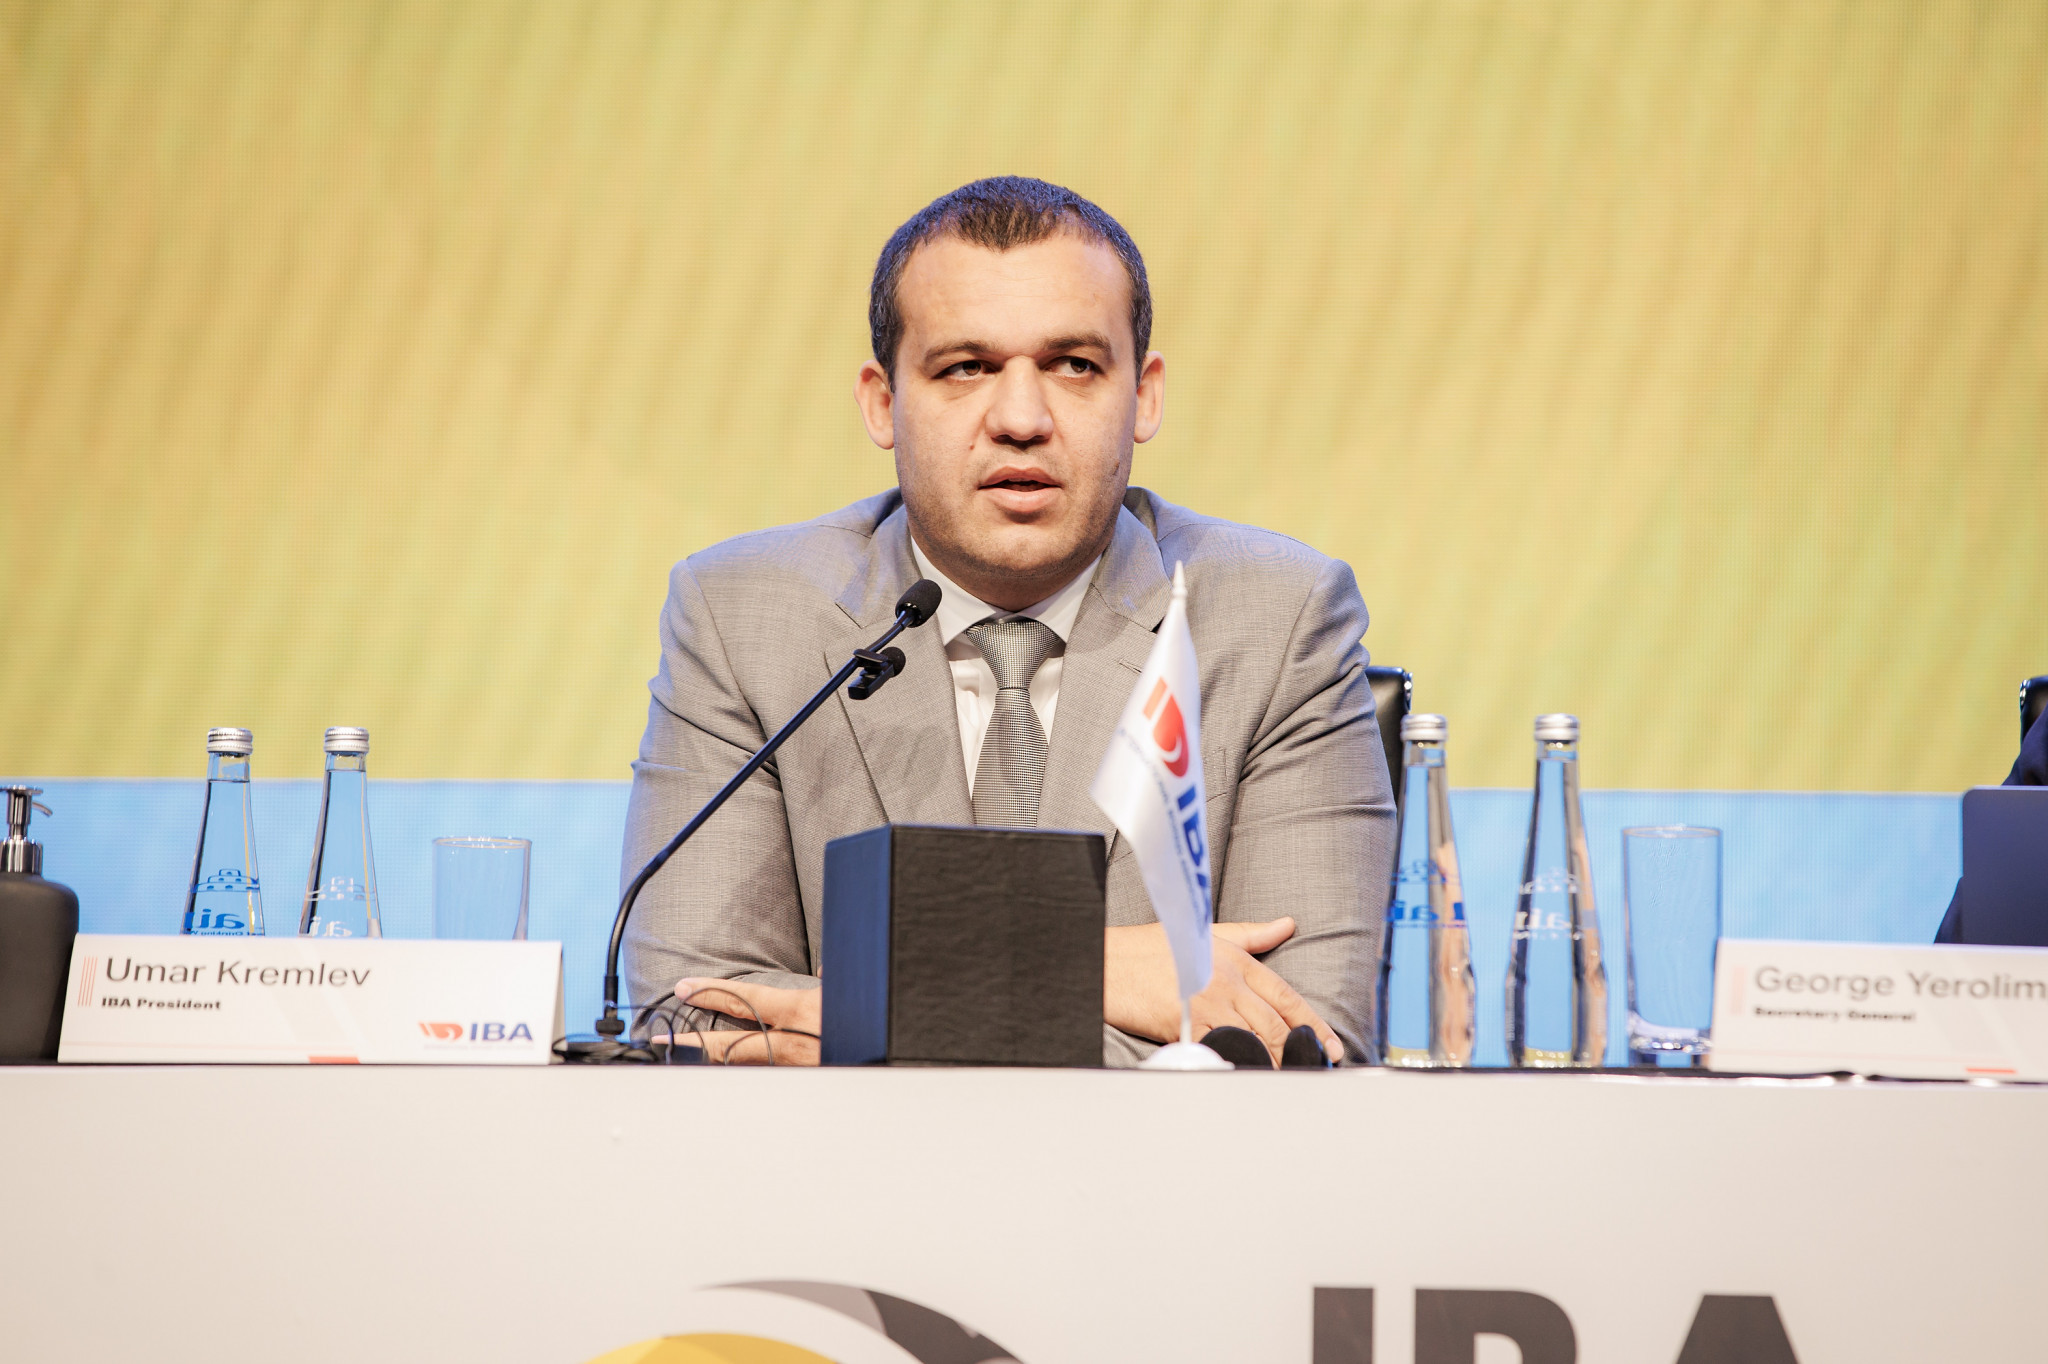 President Umar Kremlev confirmed that the IBA was planning to renew its sponsorship deal with Russian state-owned gas and oil company Gazprom ©IBA